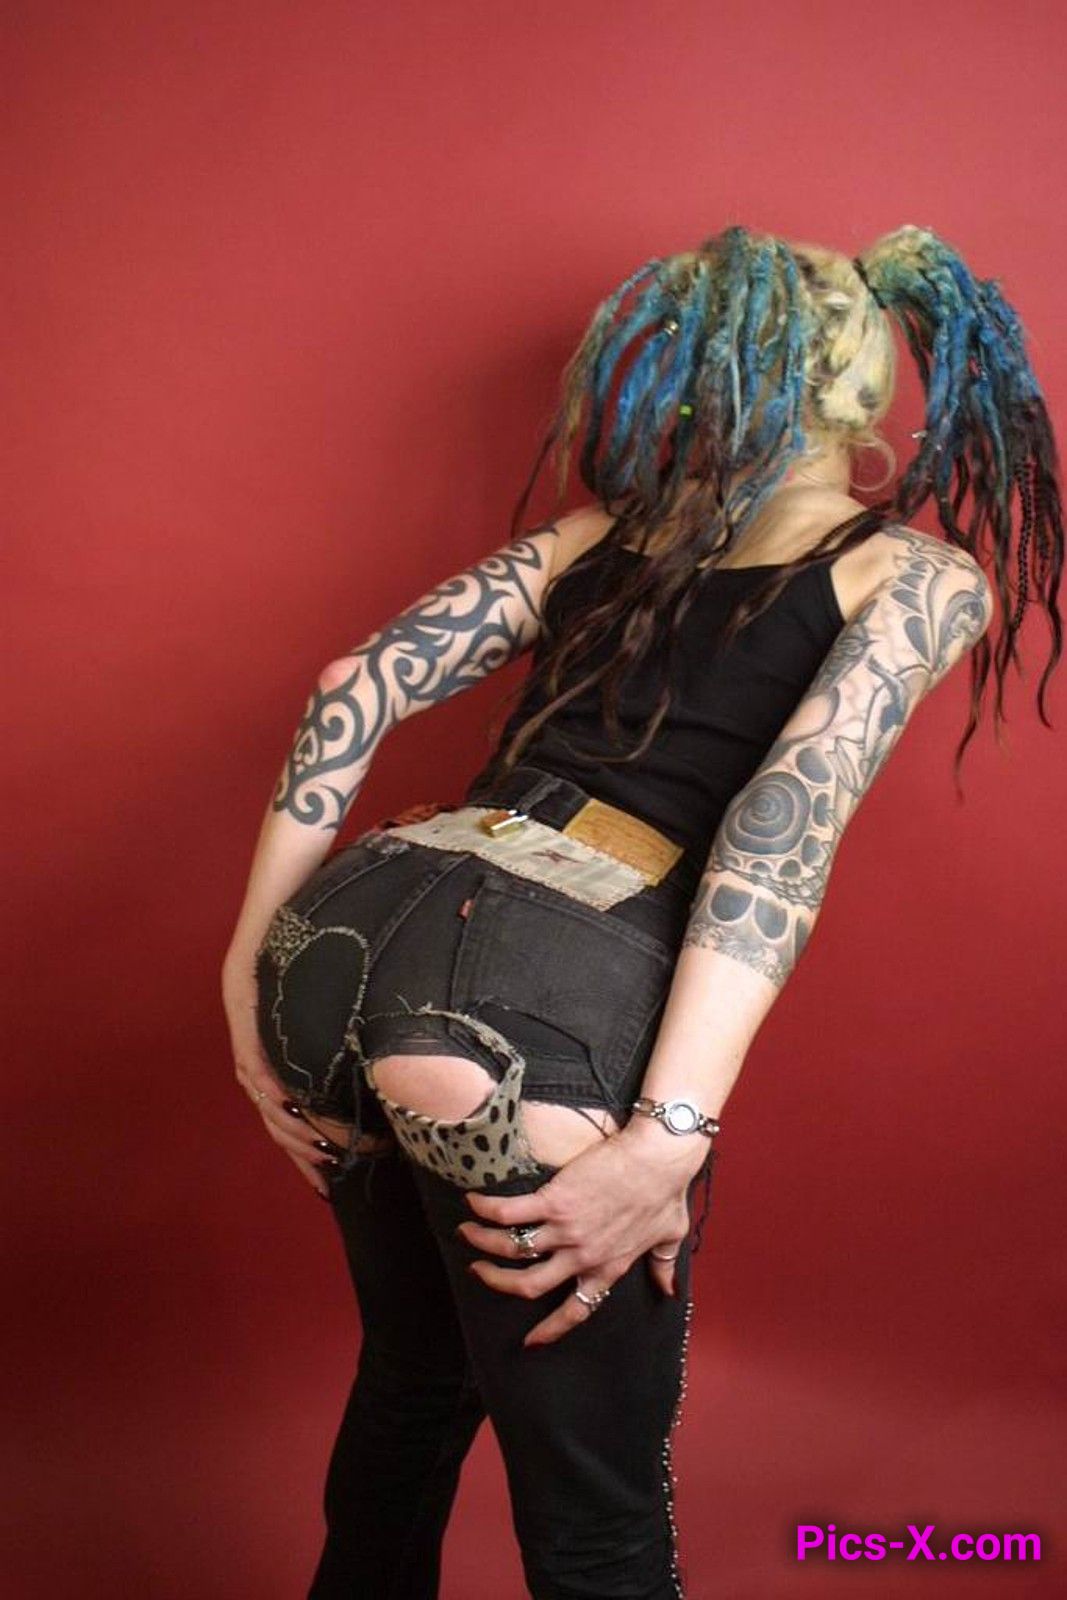 Blue haired punk hottie peeling out of her clothes to pose - Punk Rock Girlfriend - Image 10